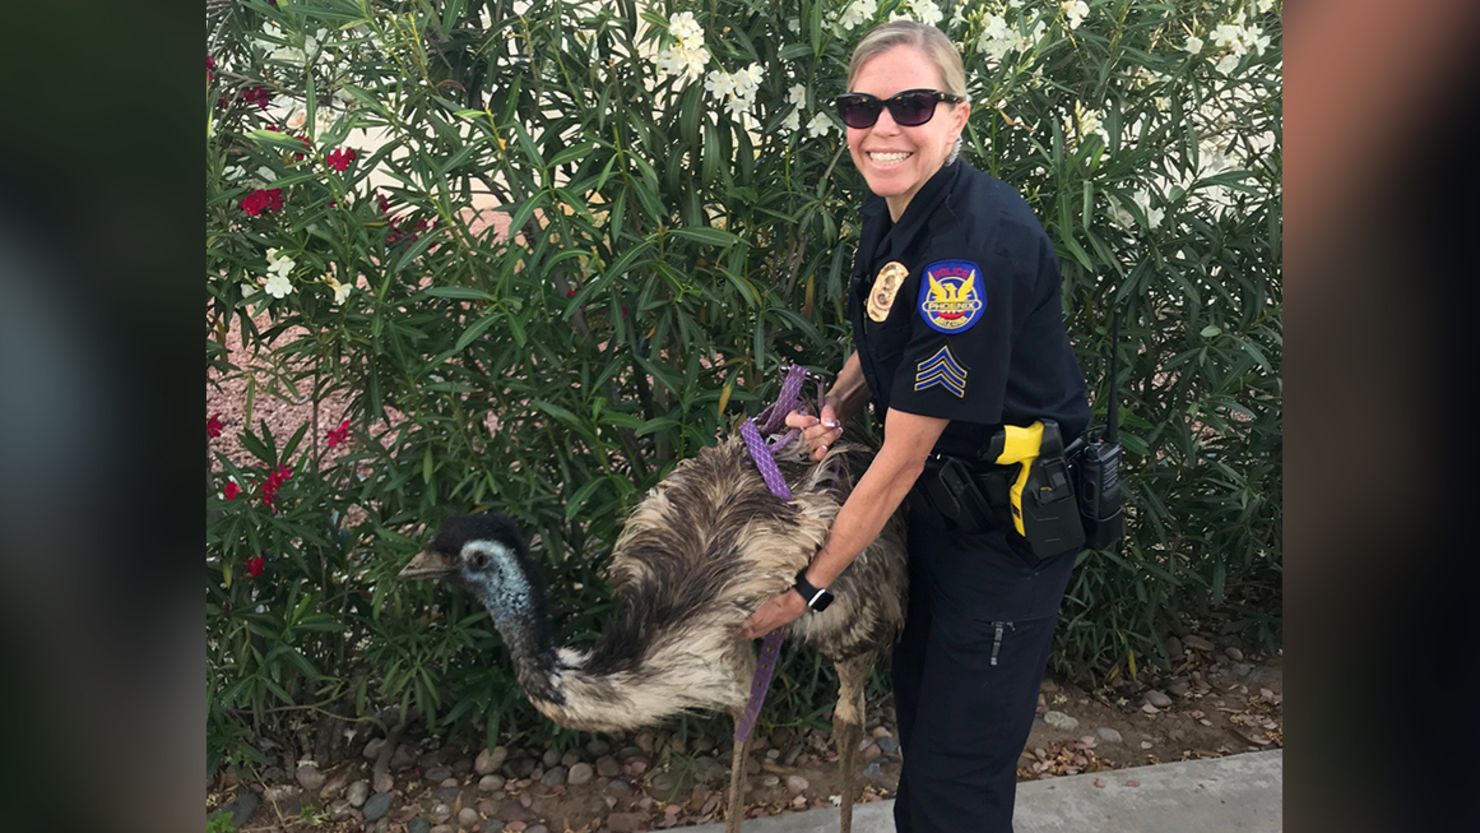 A Phoenix police officer poses with the escapee.